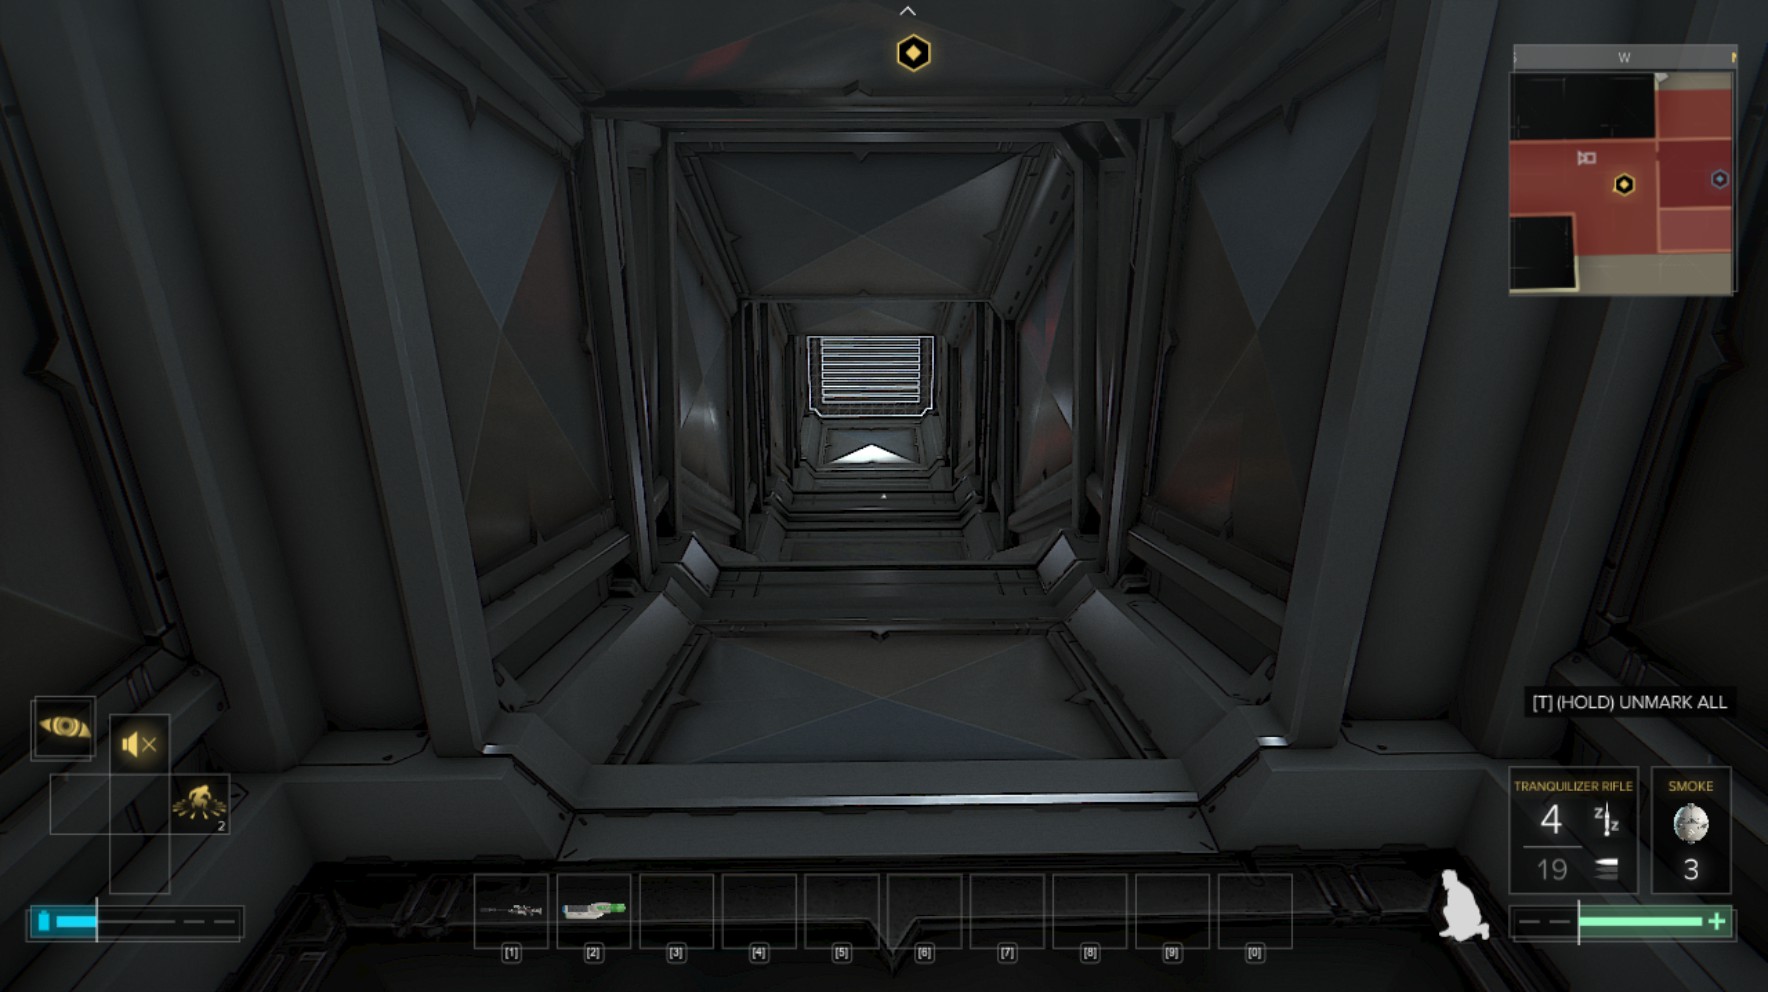 Deus Ex Gets Air Vents All Wrong, According To An Architect